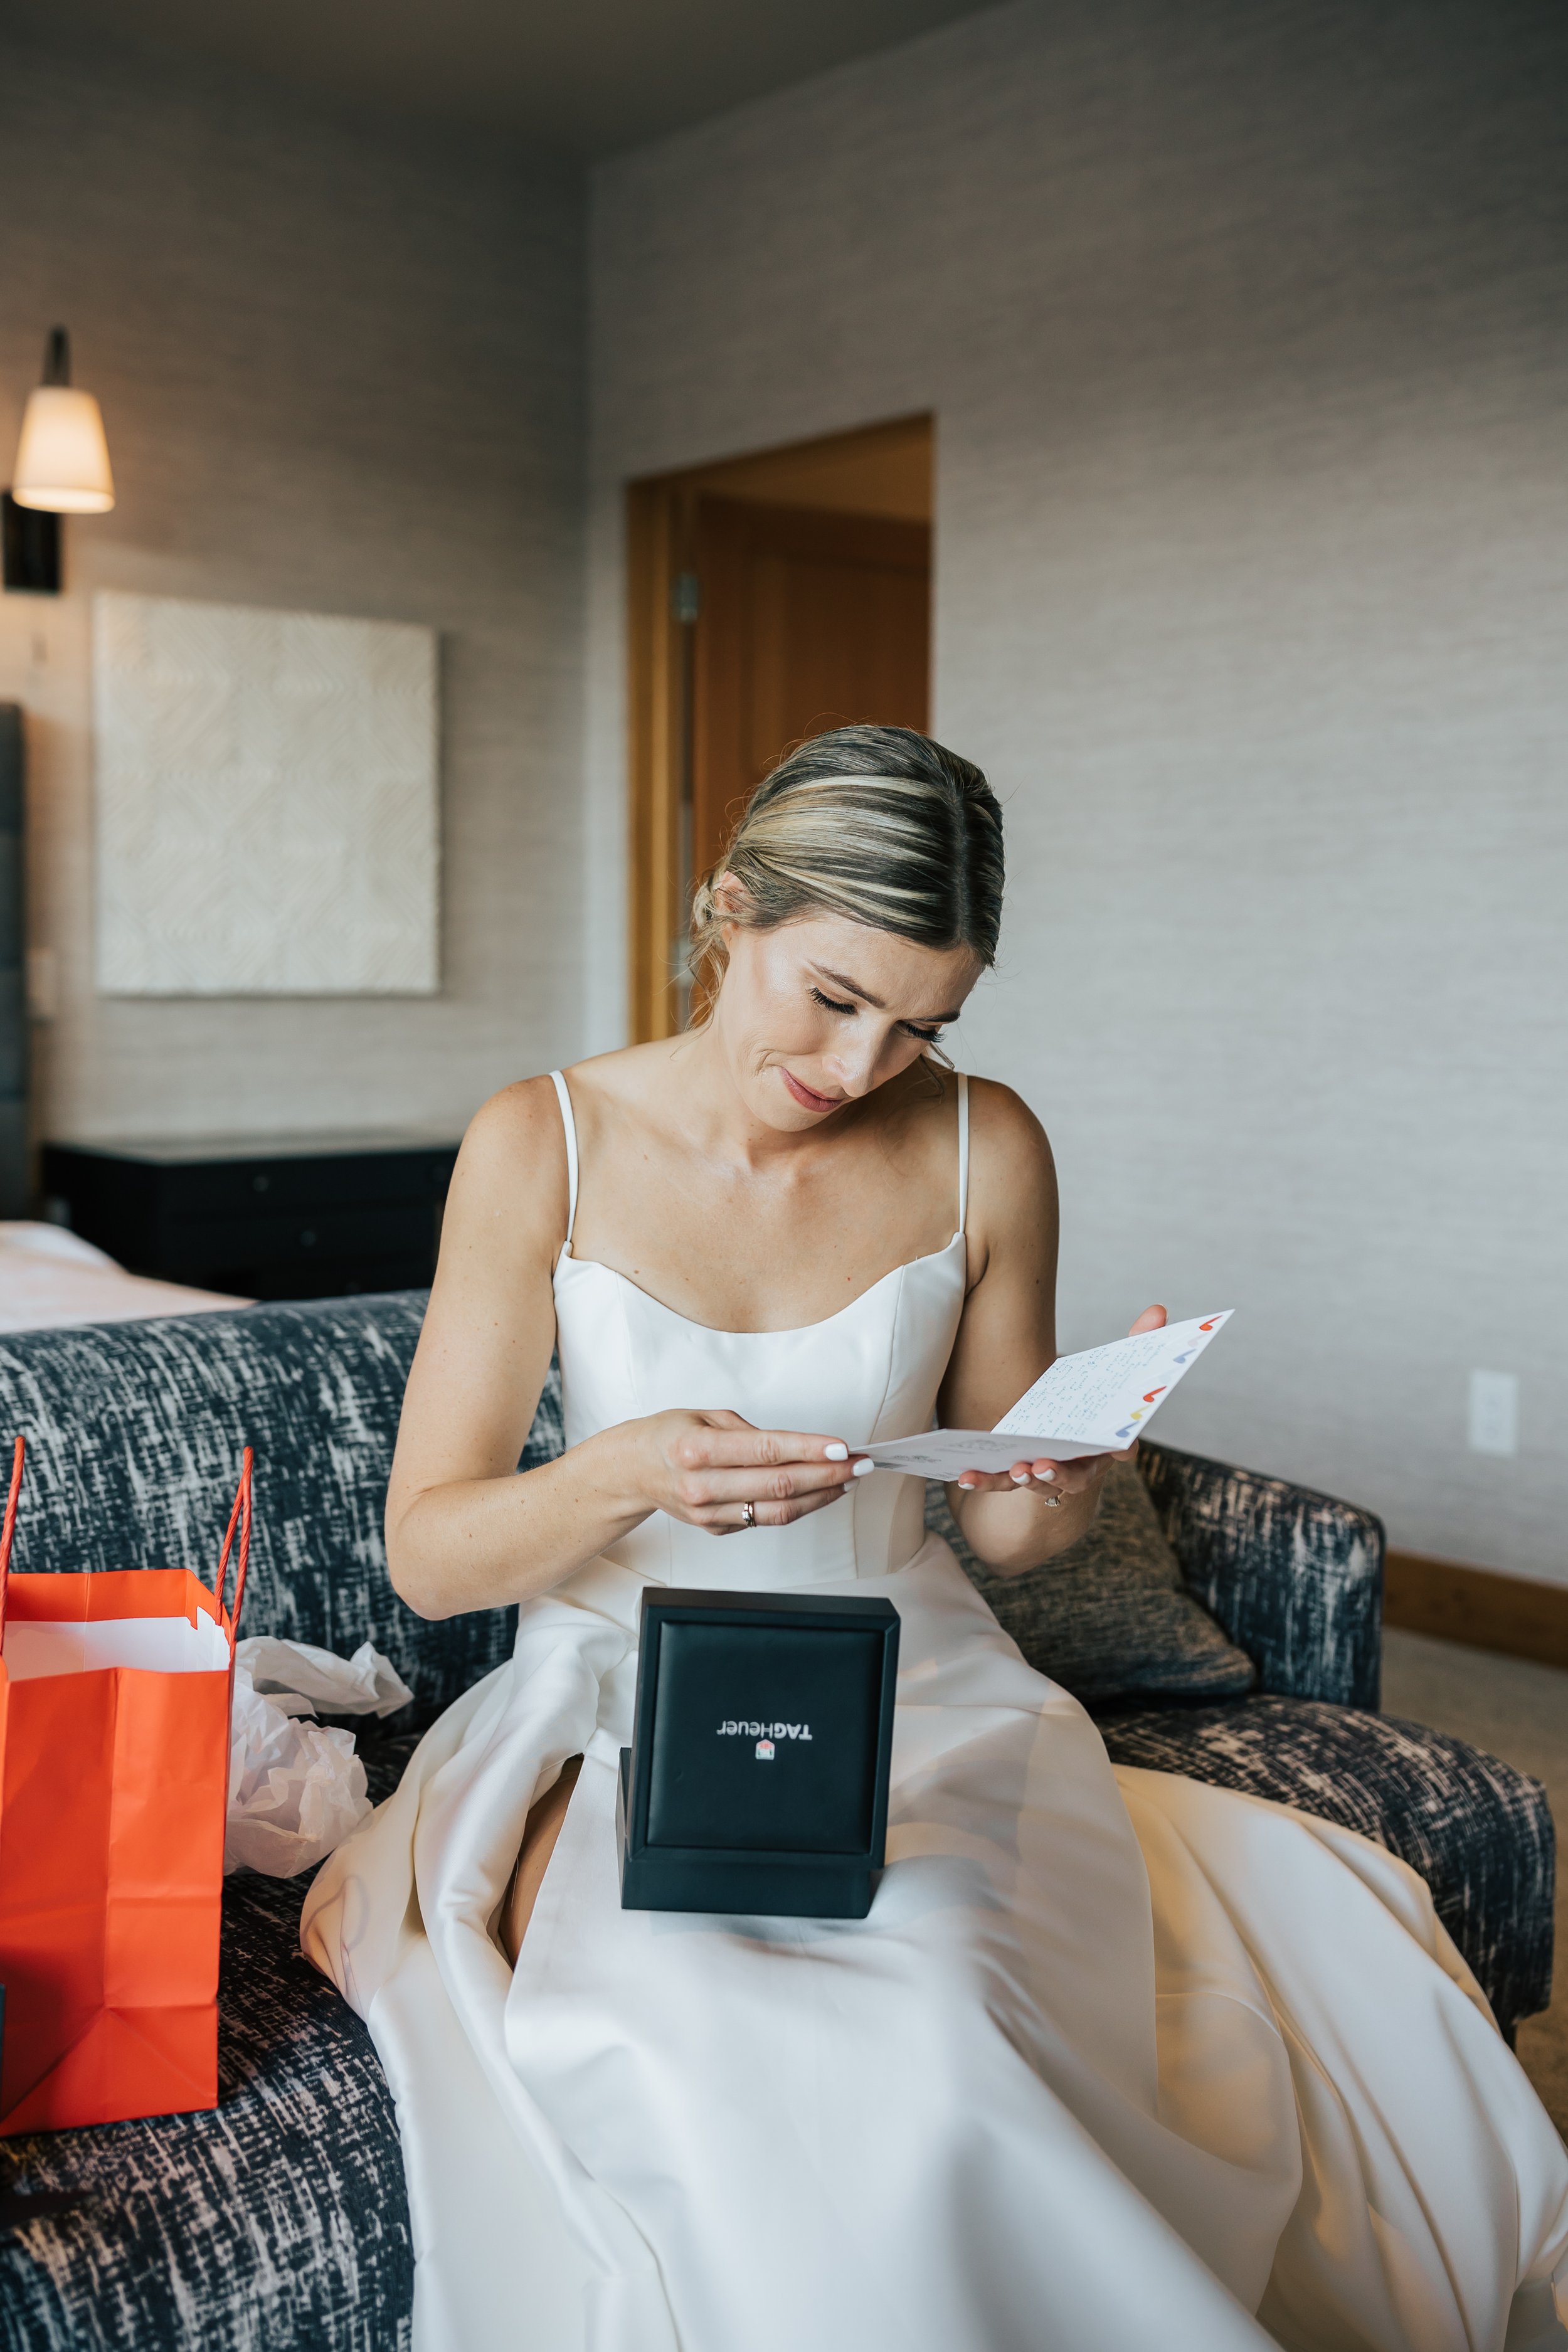  Getting ready photos. Bride gets ready in hotel room before wedding. Bride sits in wedding dress and opens gift from her groom before ceremony.  #montanawedding #utahwedding #gettingreadyphotos 